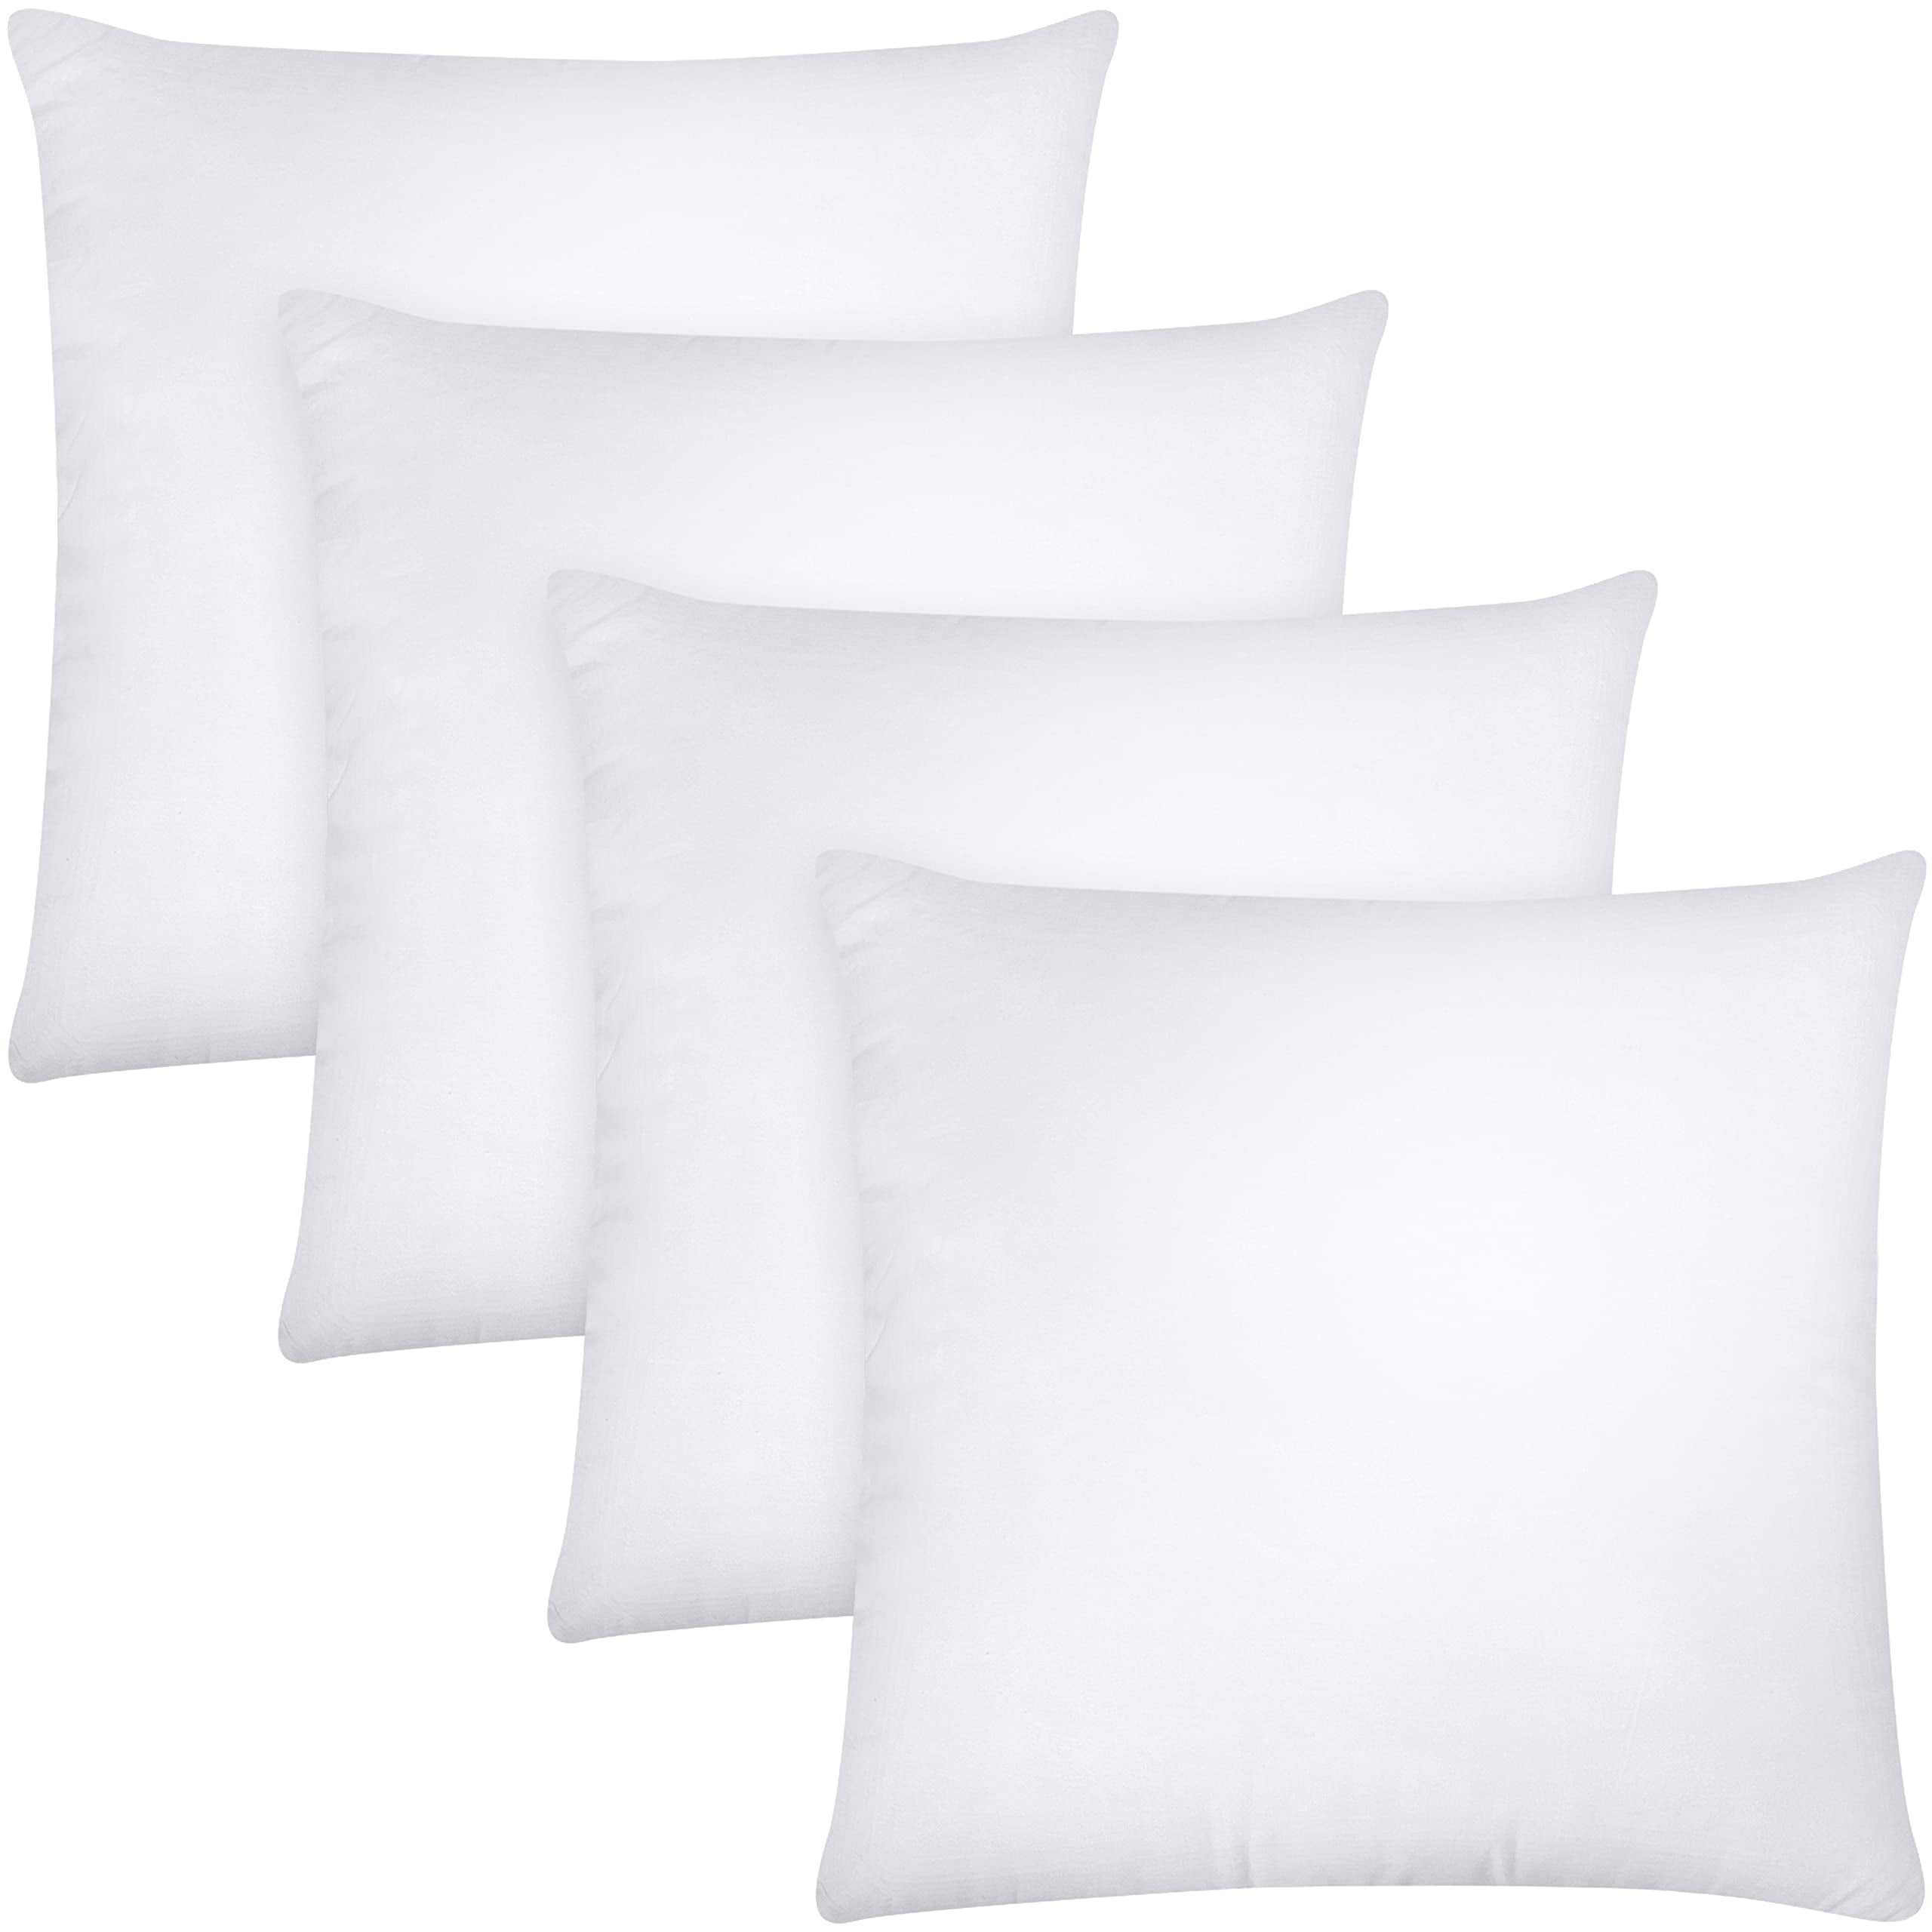 Utopia Bedding Throw Pillows Insert (Pack of 4, White) - 12 x 12 Inches Bed  and couch Pillows - Indoor Decorative Pillows